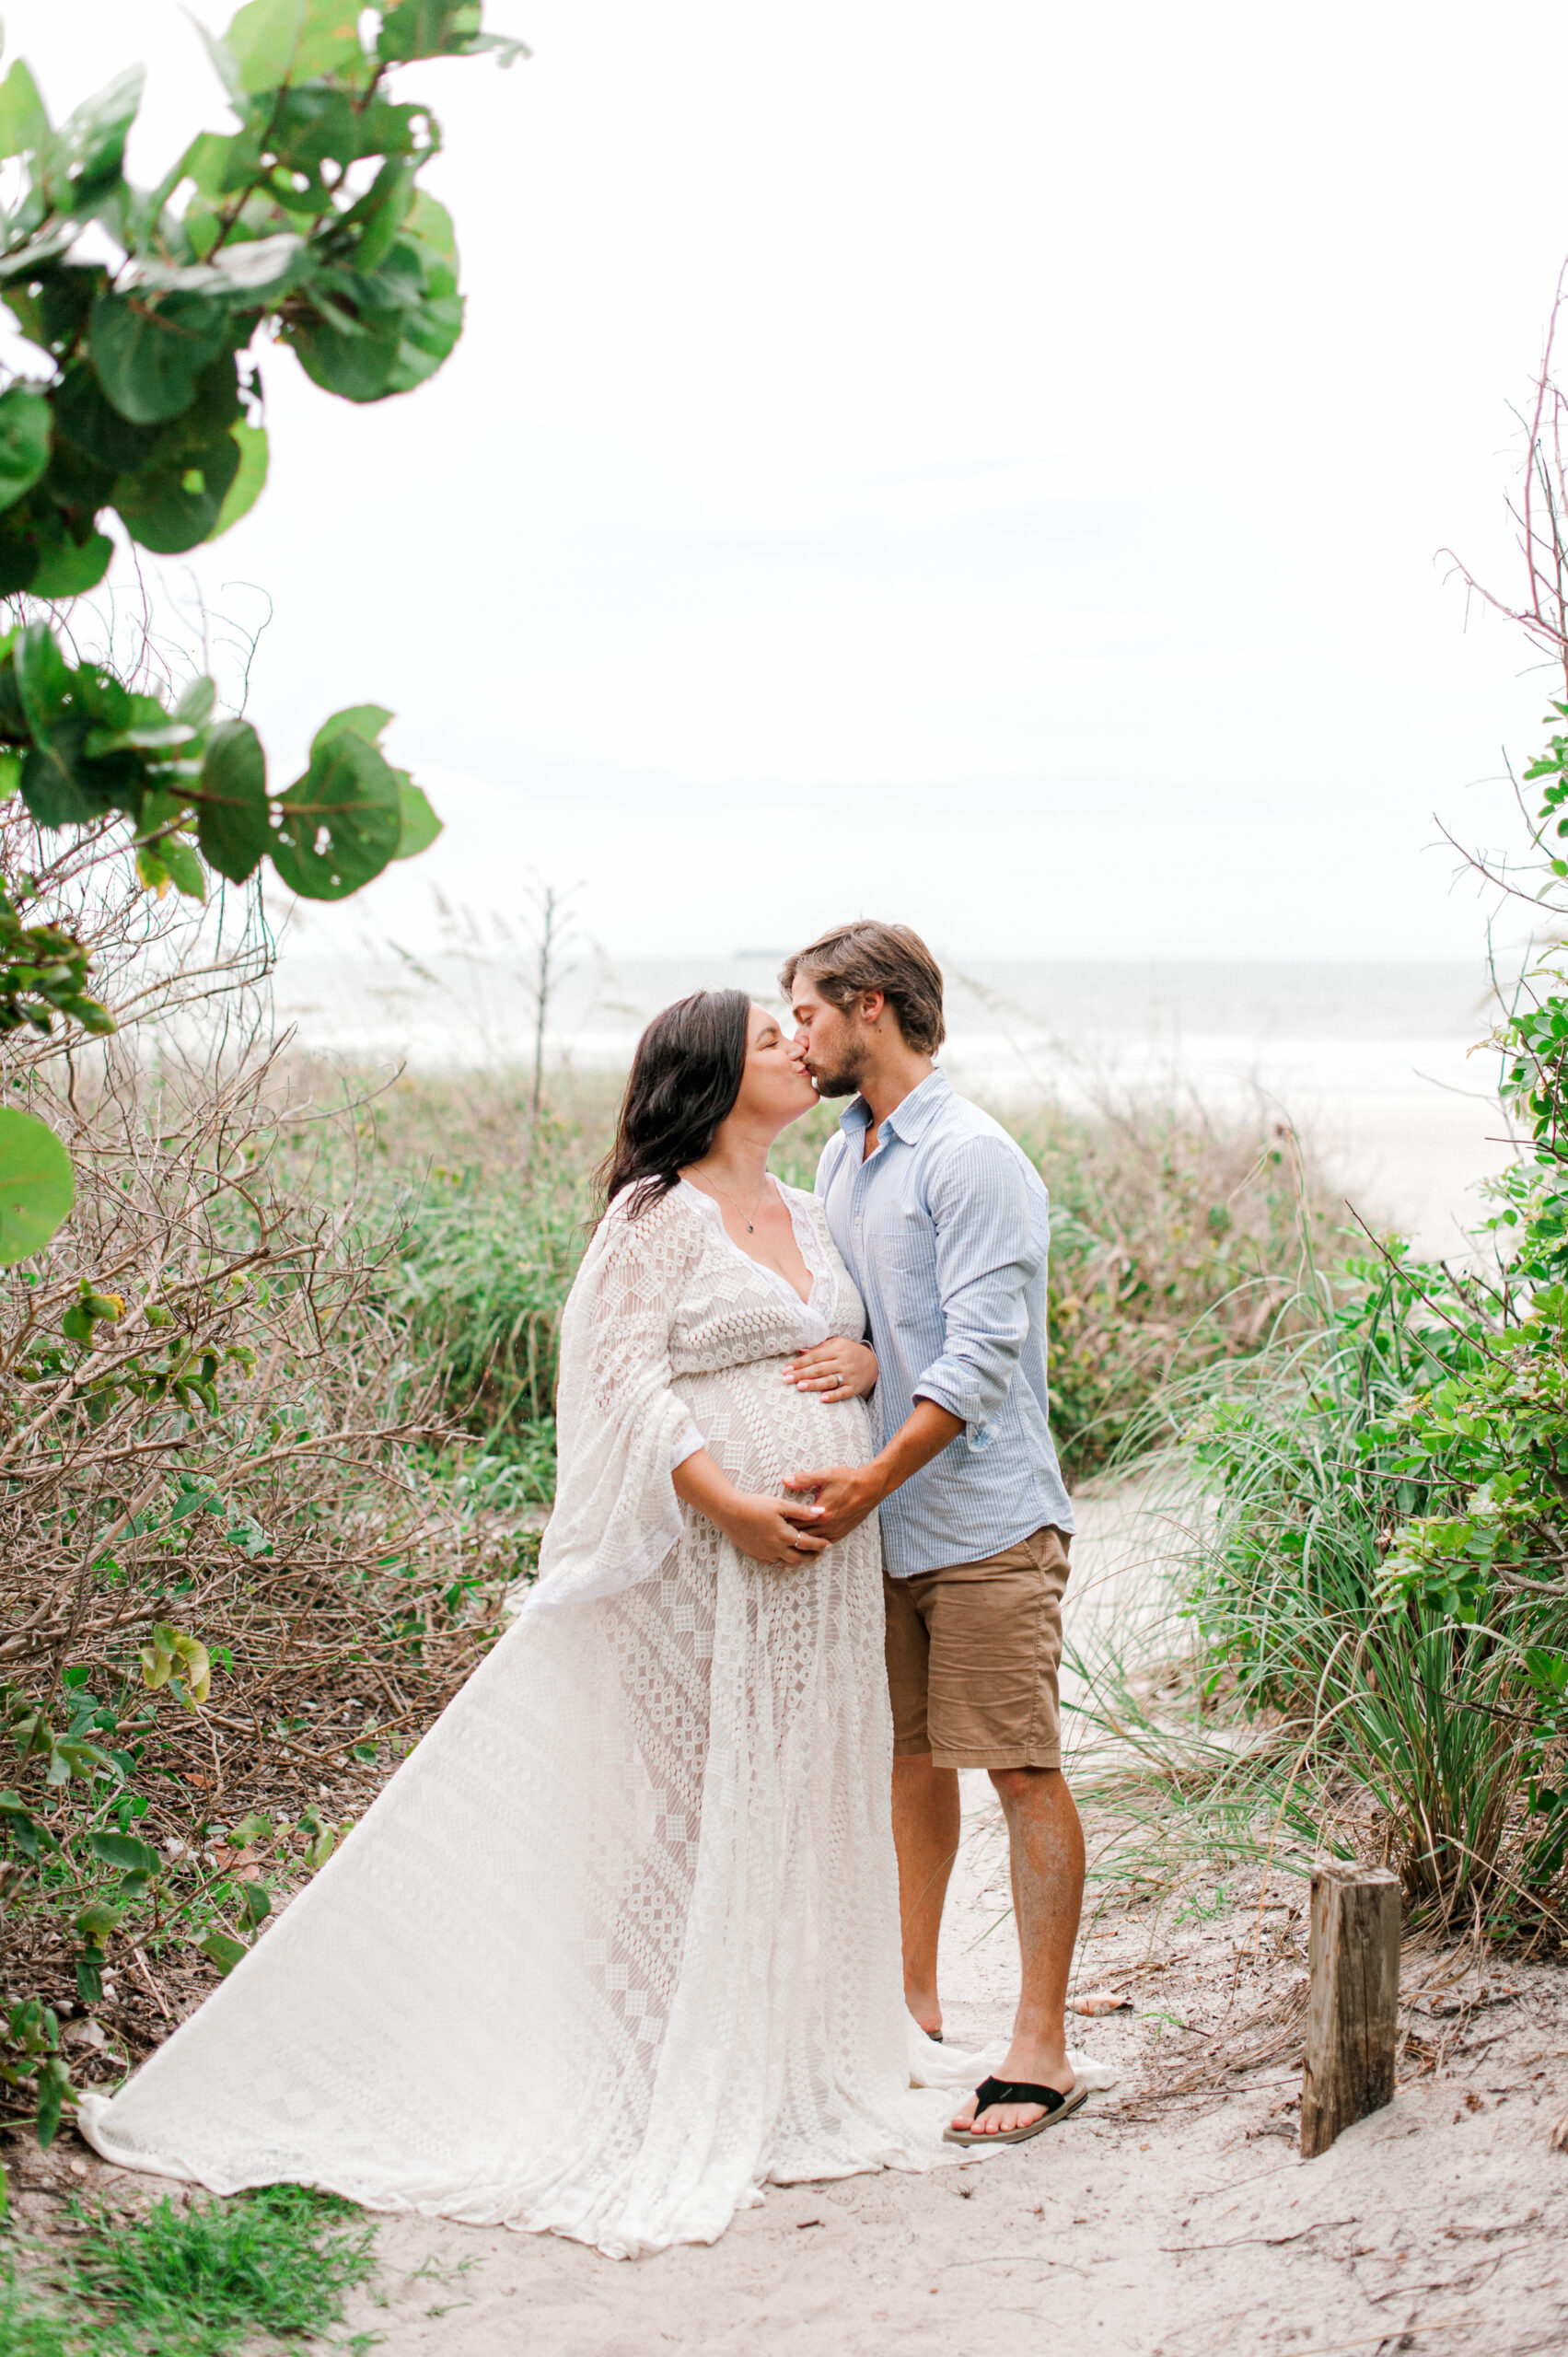 Soon to be new mom and dad kissing near the dunes with the beach in the background while holding her belly serendipity birthing